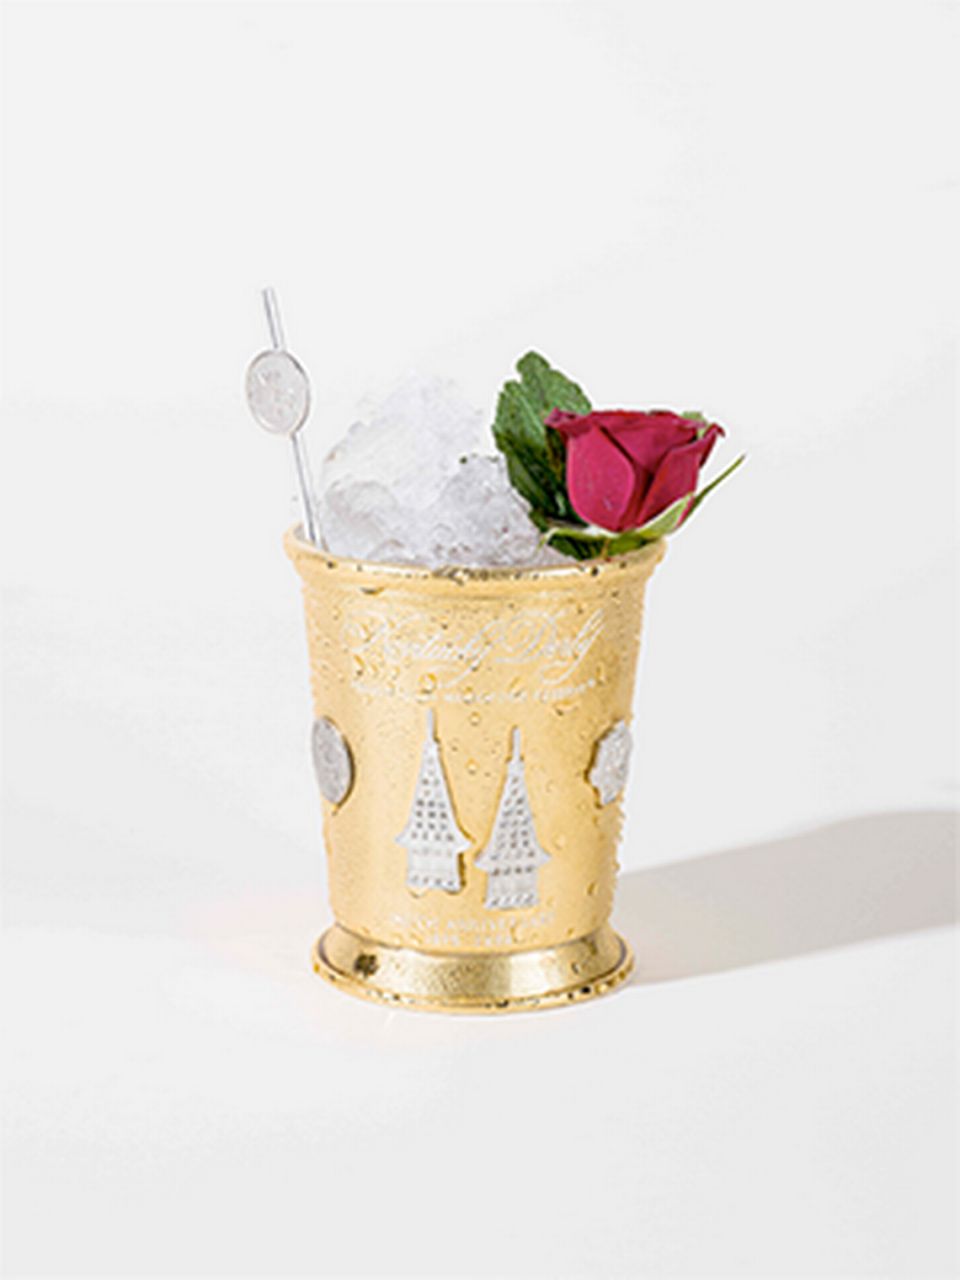 This year there are special gold mint julep cups available for $5,000 at the Woodford Reserve $1,000 Mint Julep Cup Experience at Churchill Downs on Oaks Day on May 3 or Kentucky Derby Day on May 4. Provided